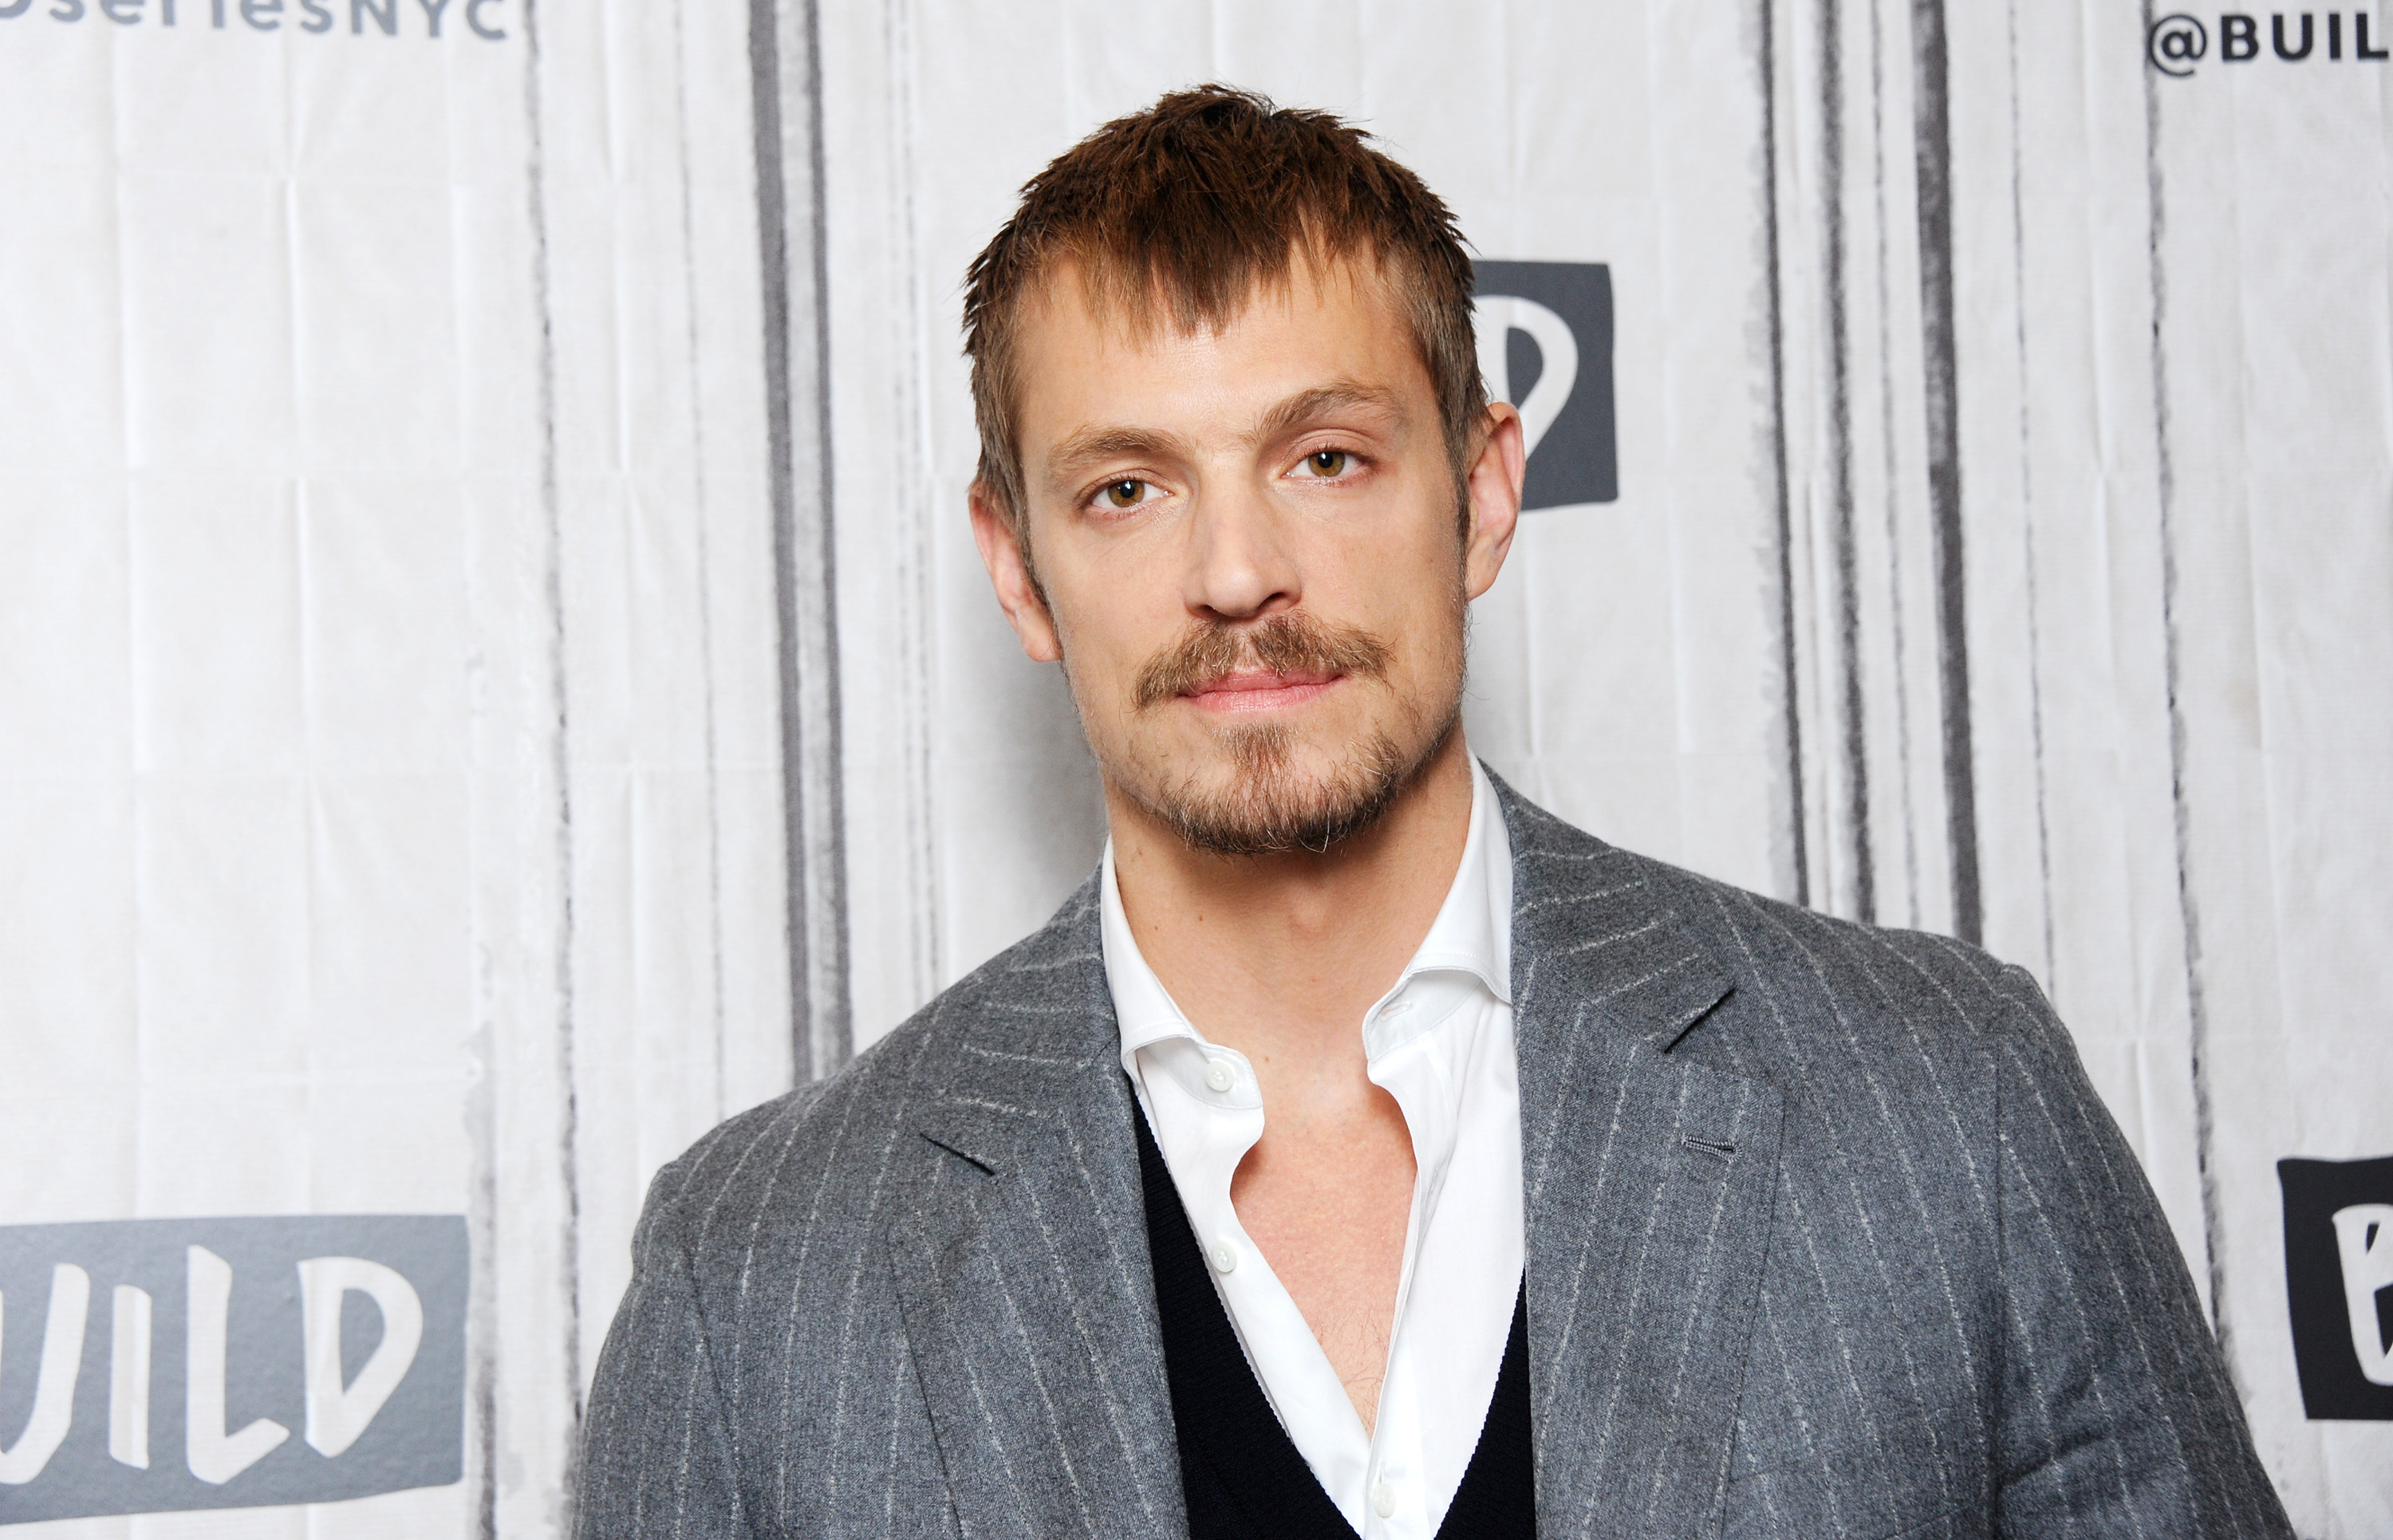 Actor Joel Kinnaman visits Build Series to discuss TV series 'Altered Carbon' at Build Studio on January 31, 2018 in New York City.  (Photo by Desiree Navarro/WireImage) (Desiree Navarro—WireImage)